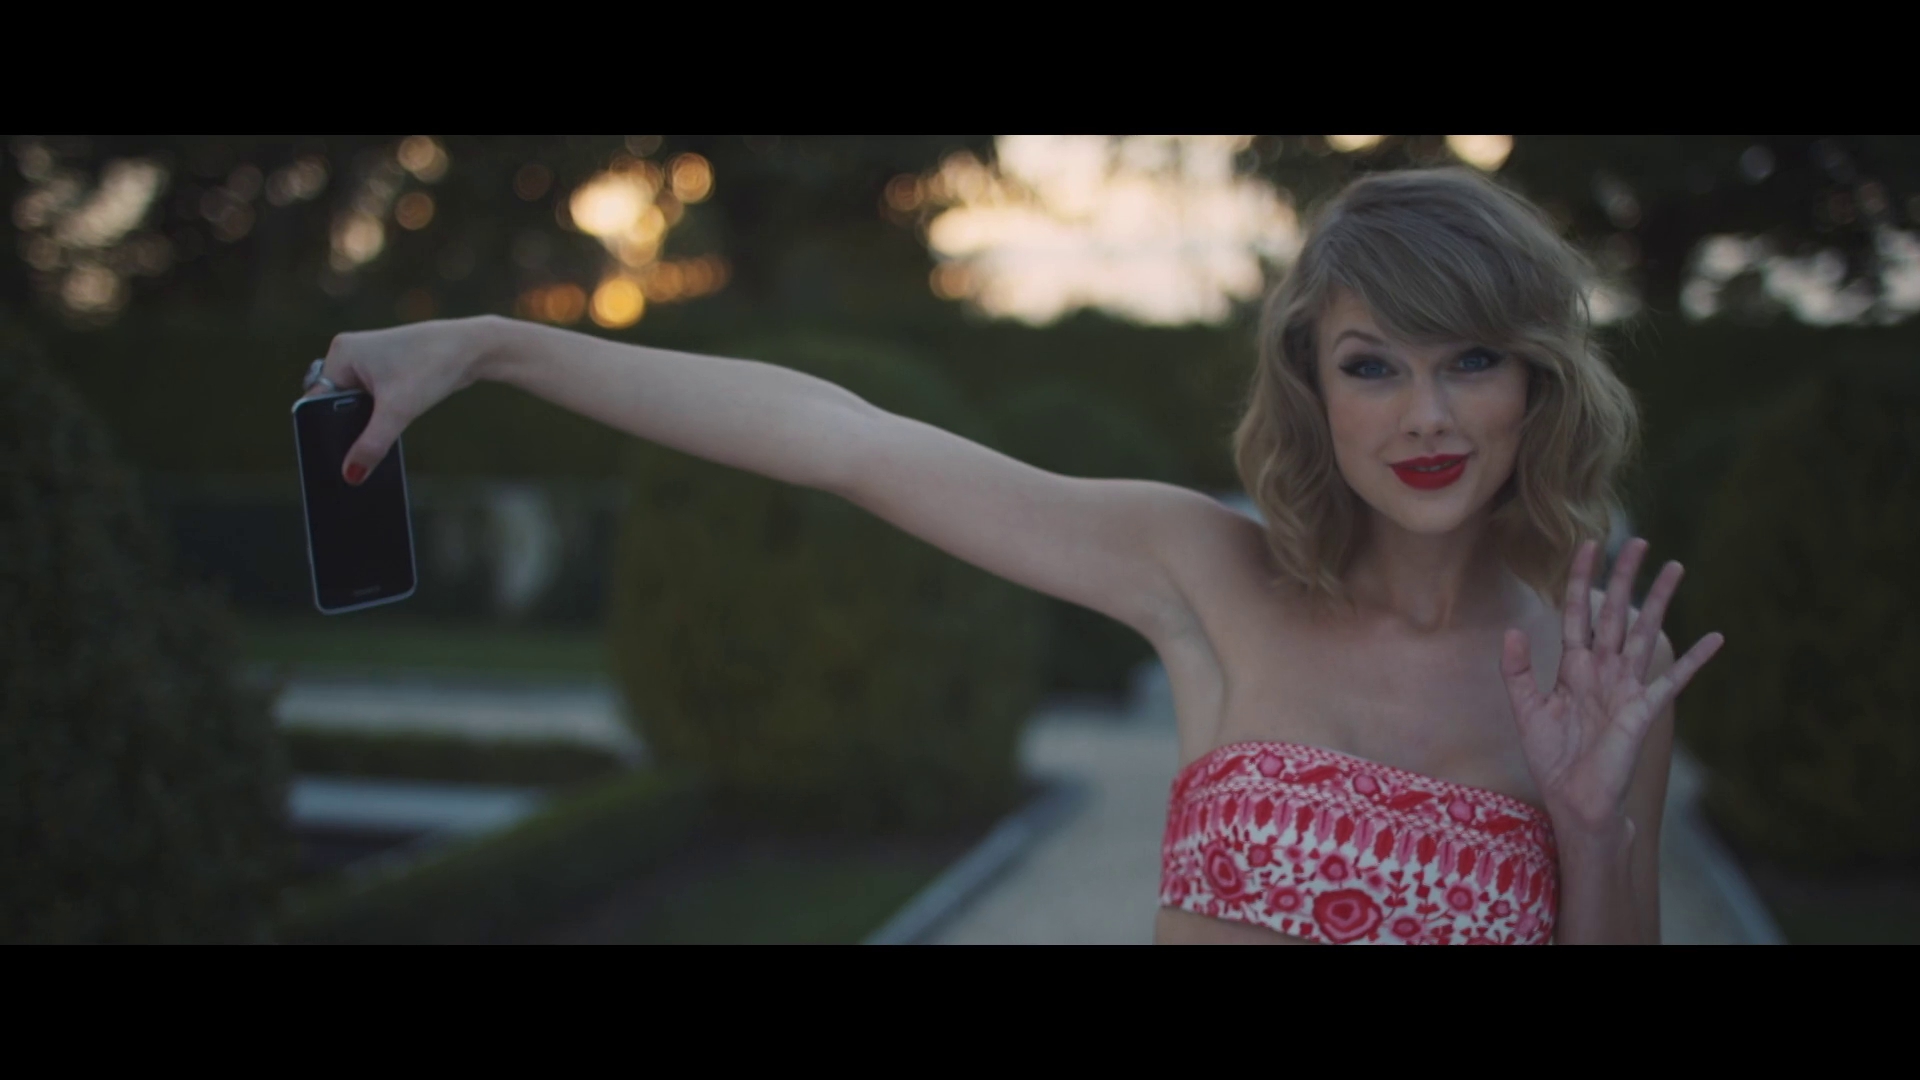 Screen Captures 203 Taylor Swift Web Photo Gallery Your Online Source For Taylor Swift